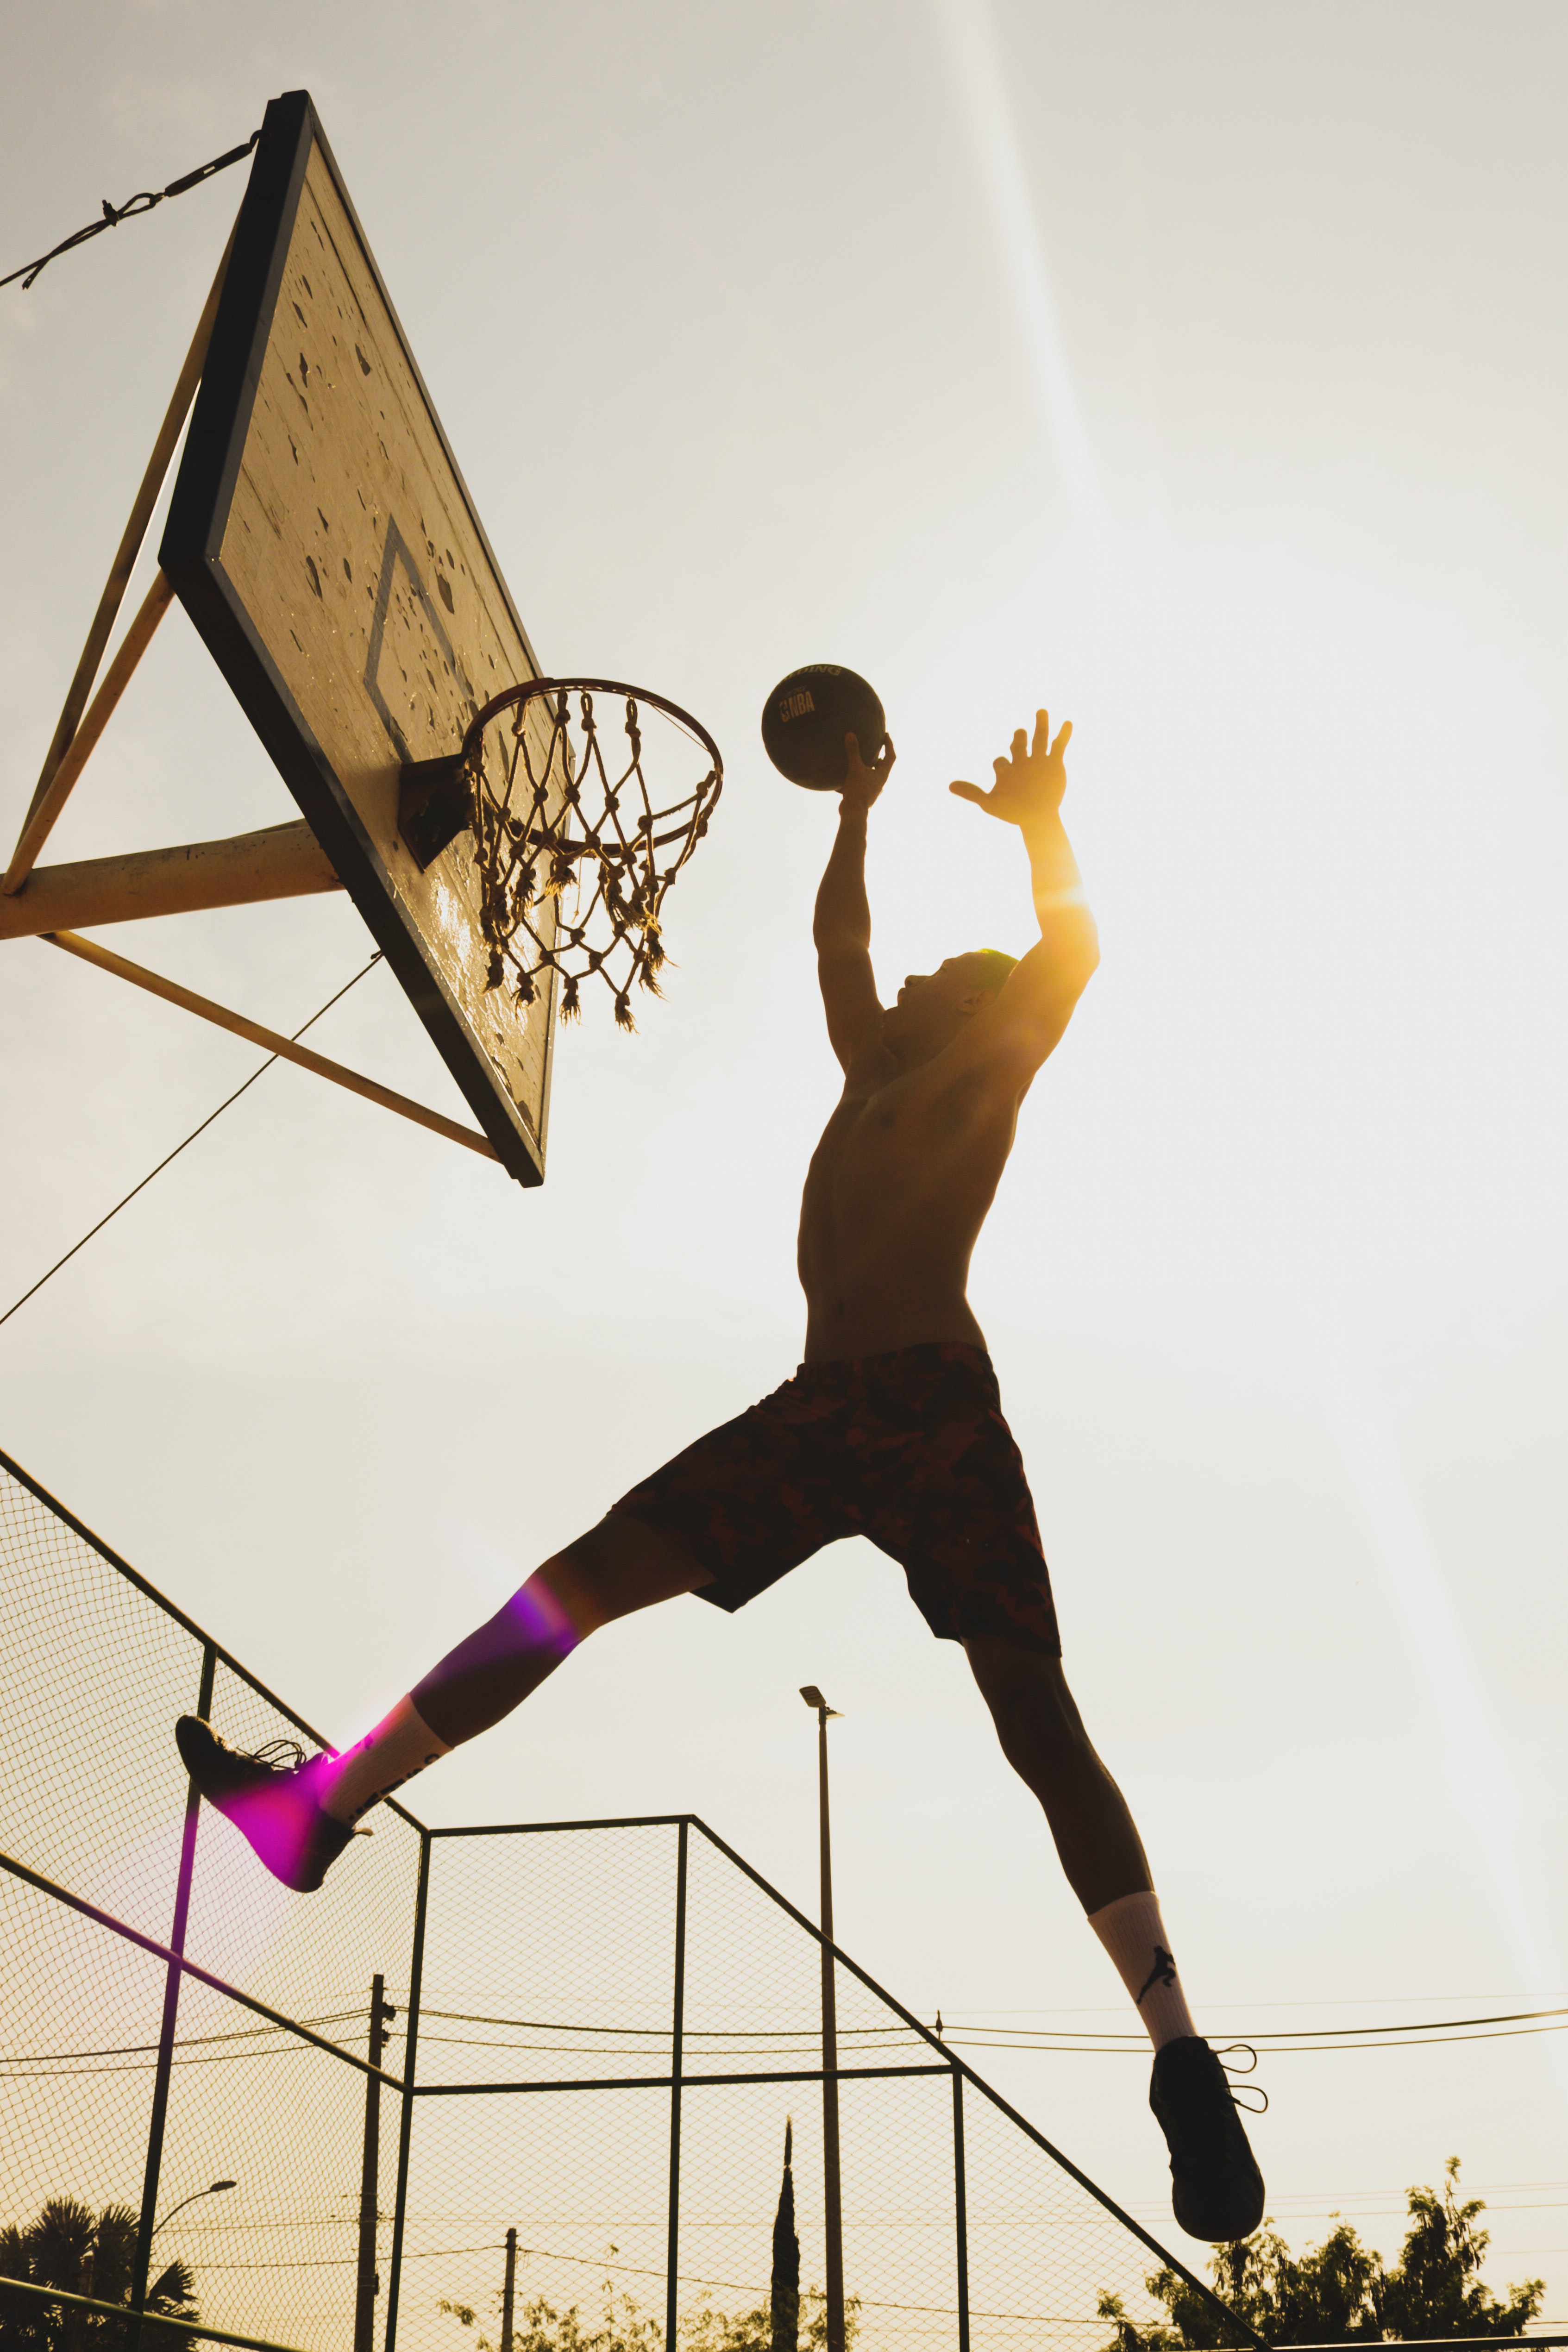 A person dunking a basketball